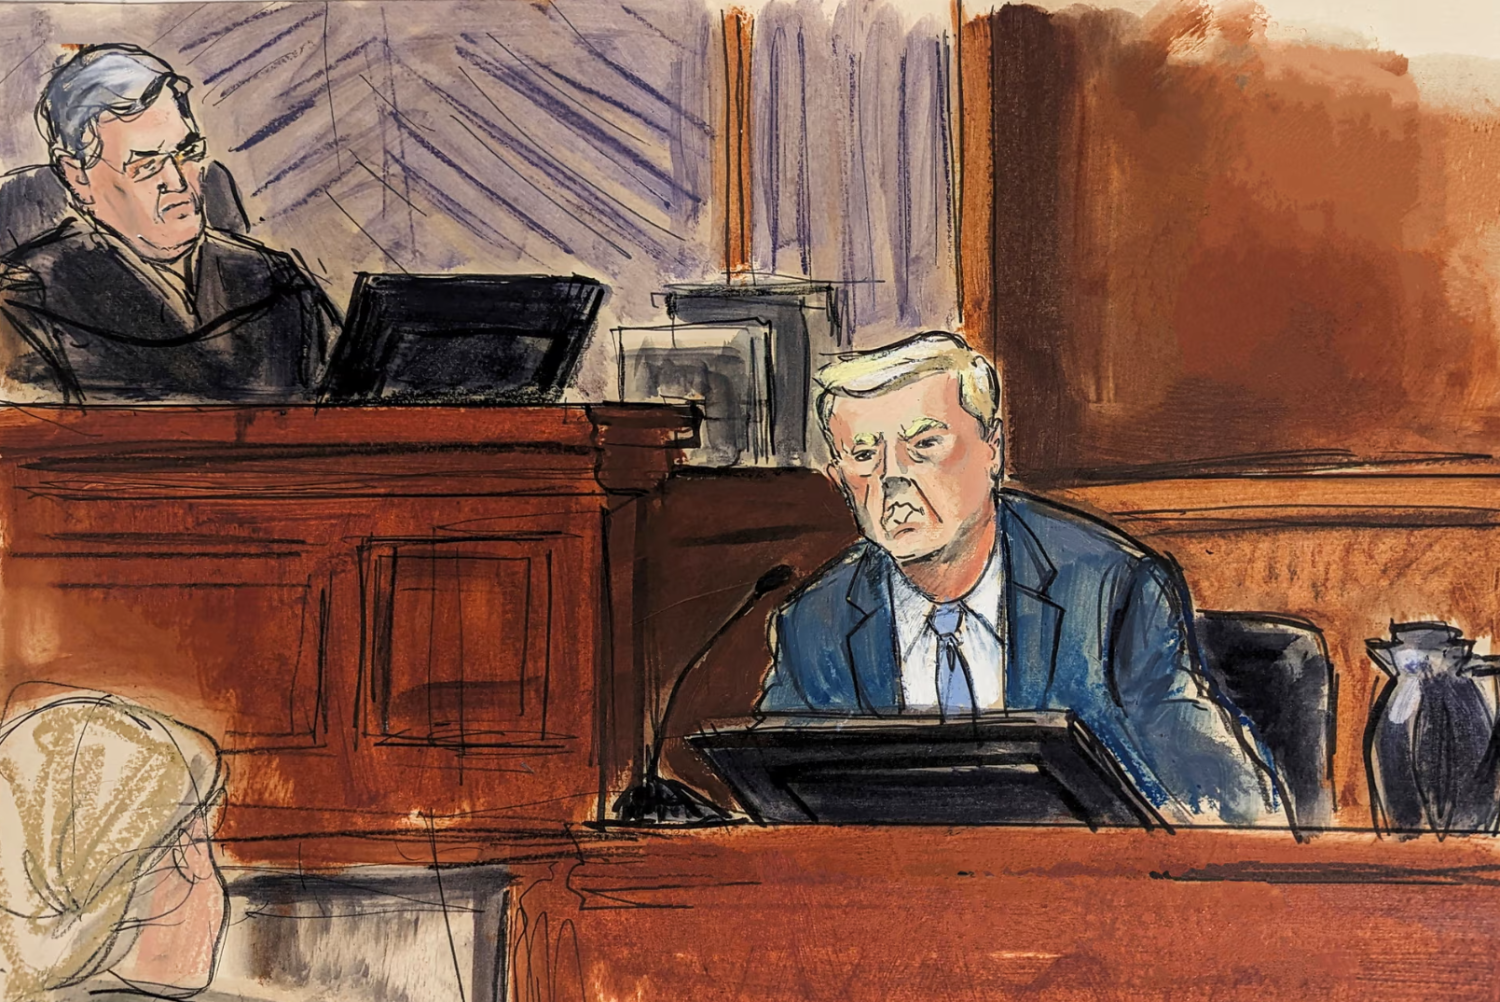 Donald Trump testifies in federal court in New York on 25 January. Photograph: Elizabeth Williams via AP